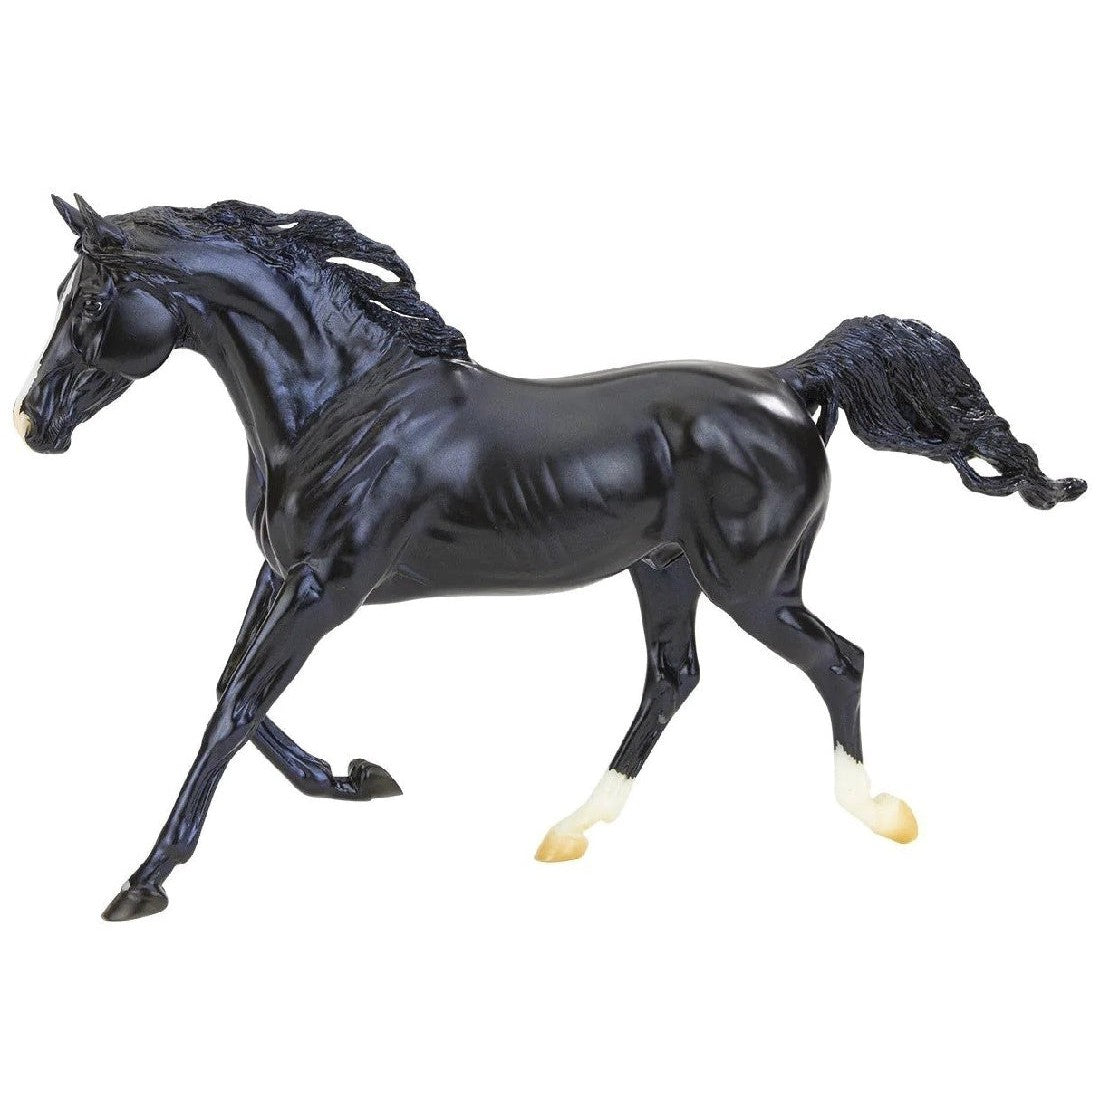 Breyer Horse Toys black stallion figure with detailed mane and tail.